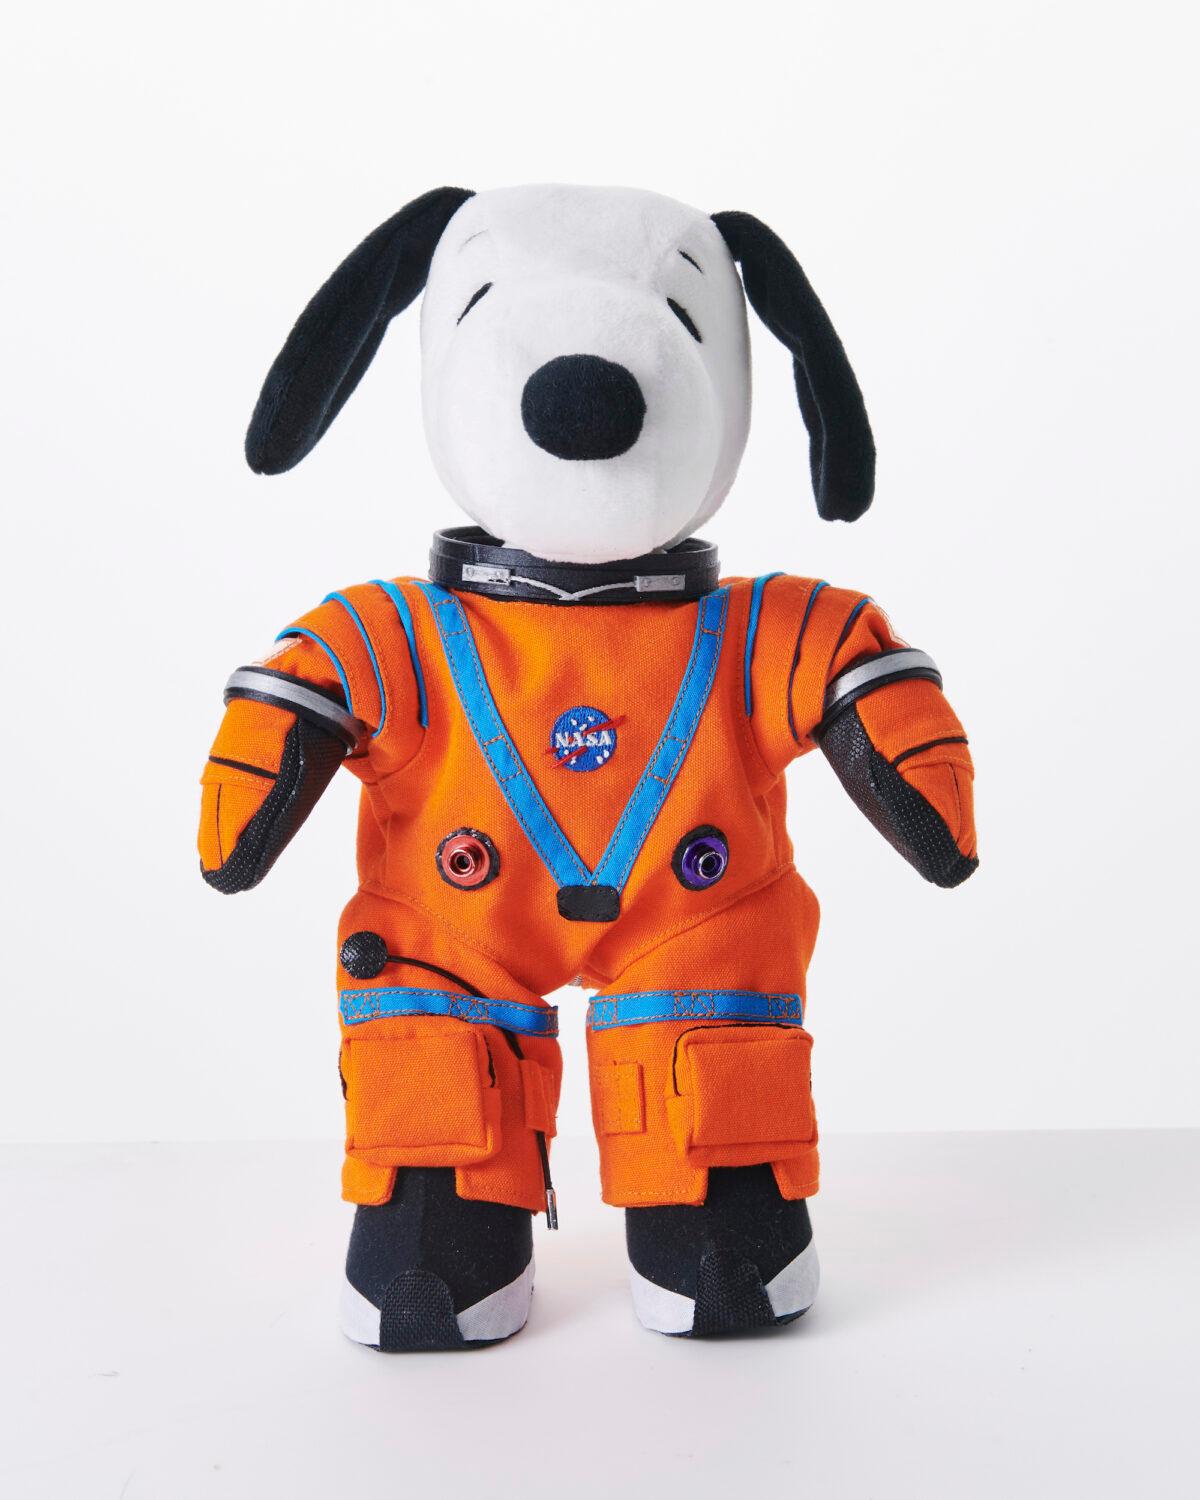 This product image shows a stuffed toy version of Snoopy wearing a NASA spacesuit. (Peanuts Worldwide via AP)